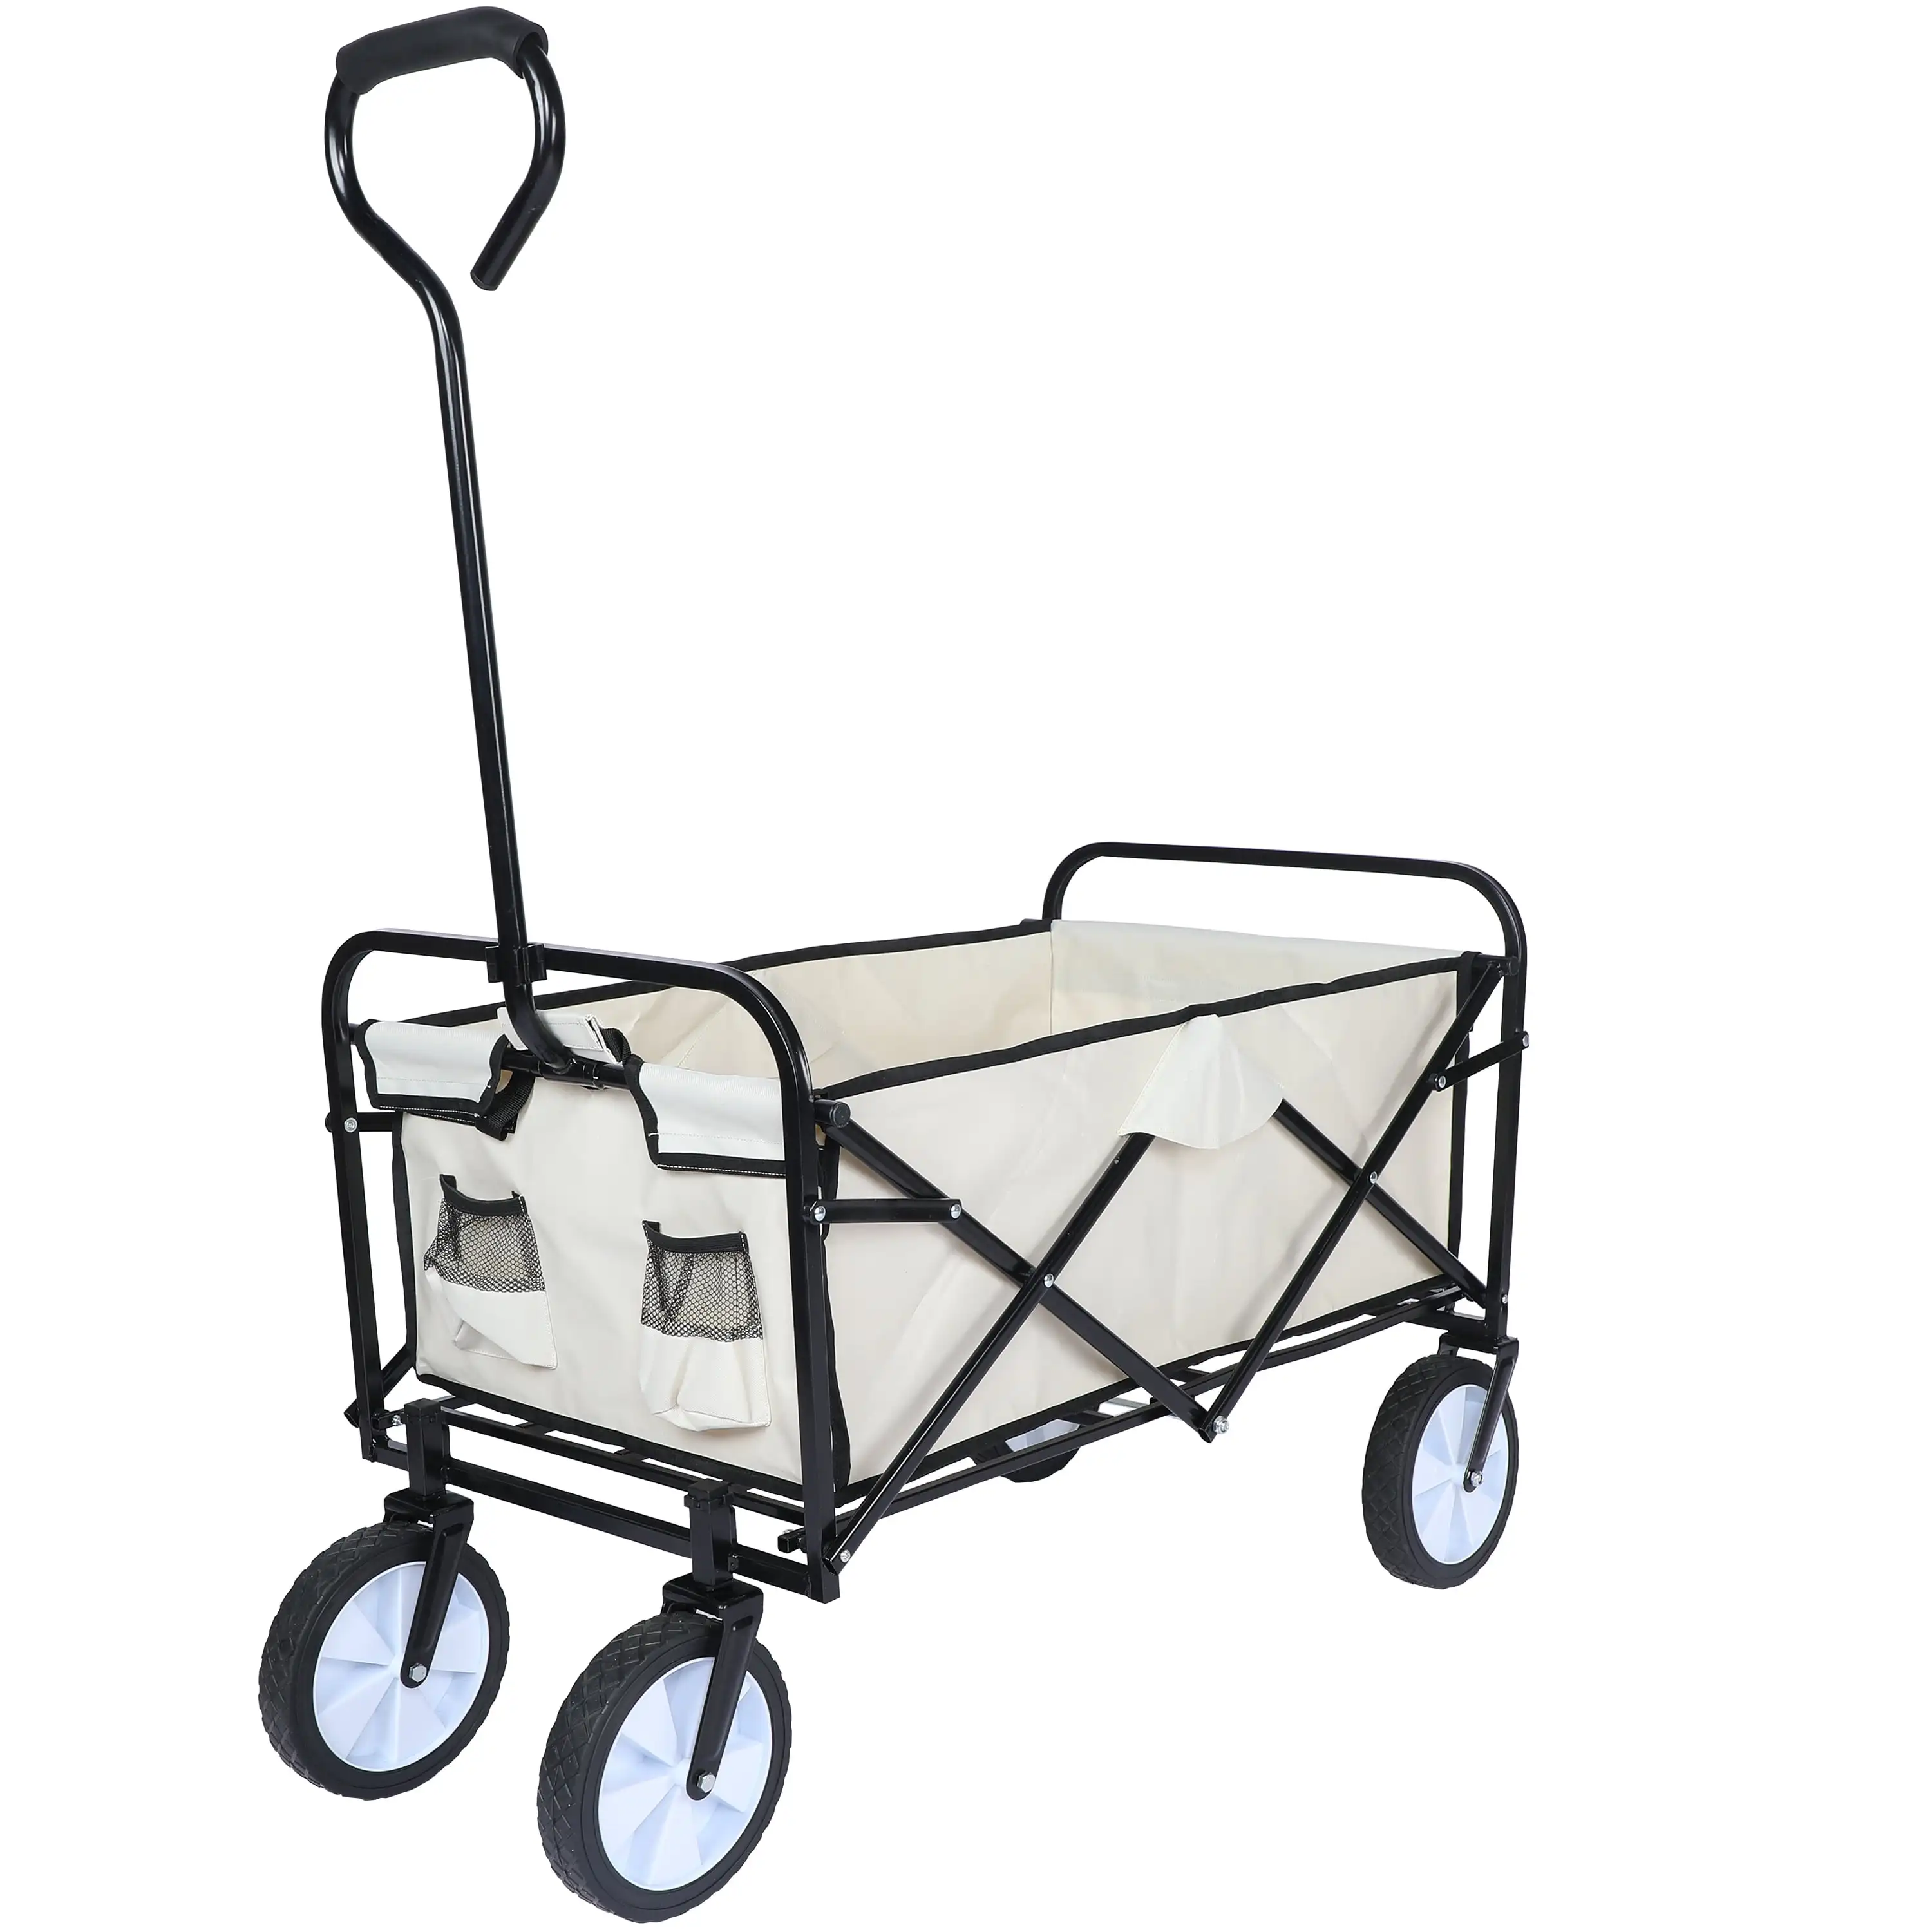 

Folding Wagon Cart, Convenient Collapsible Outdoor Wagon with Metal Frame for Camping, Shopping, White